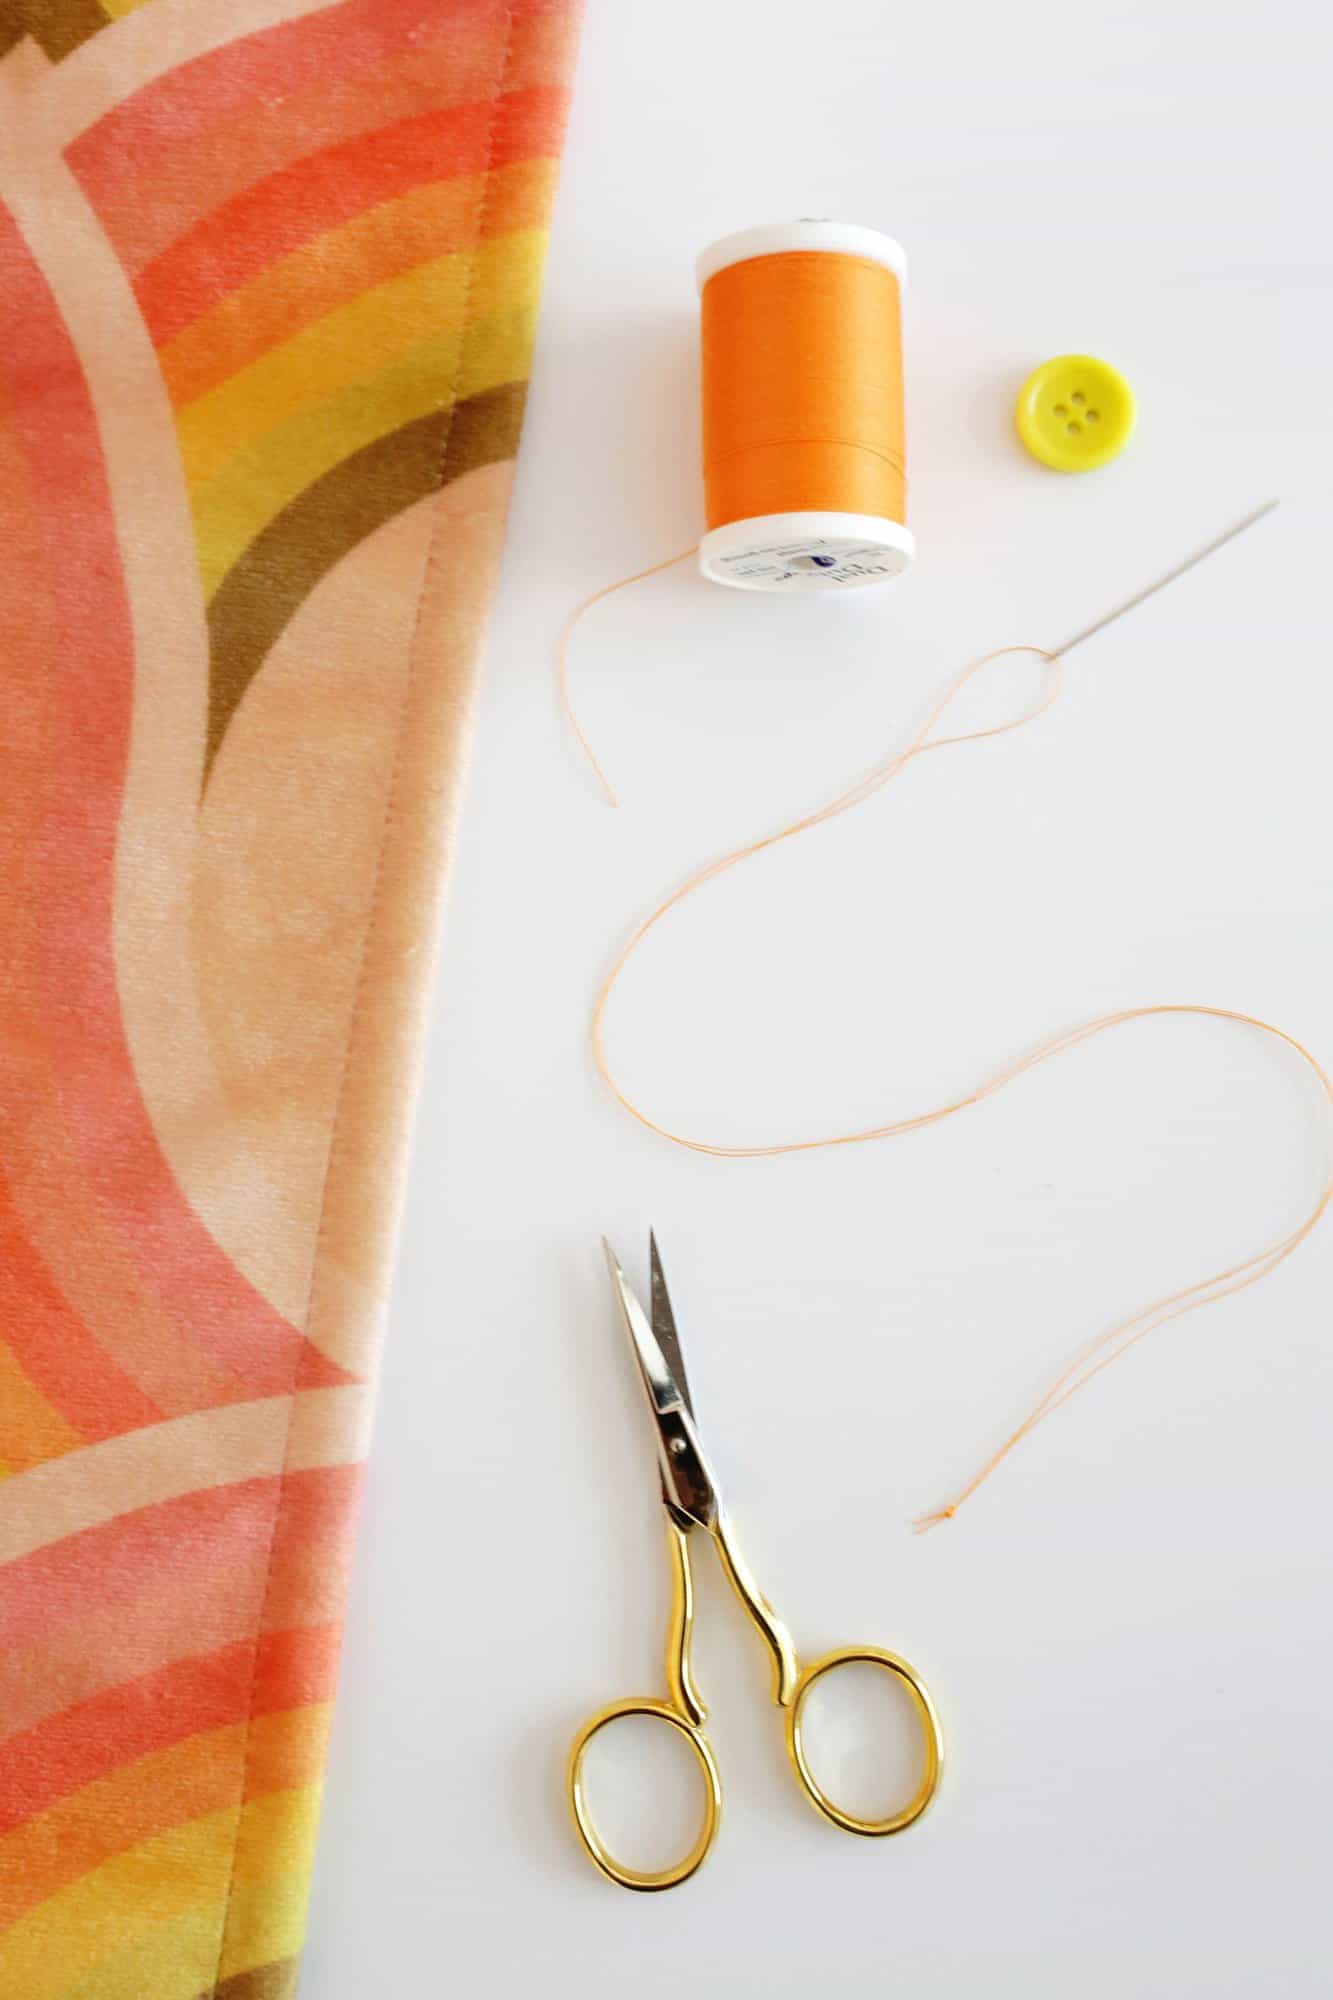 fabric, sewing needle, and thread to sew a button